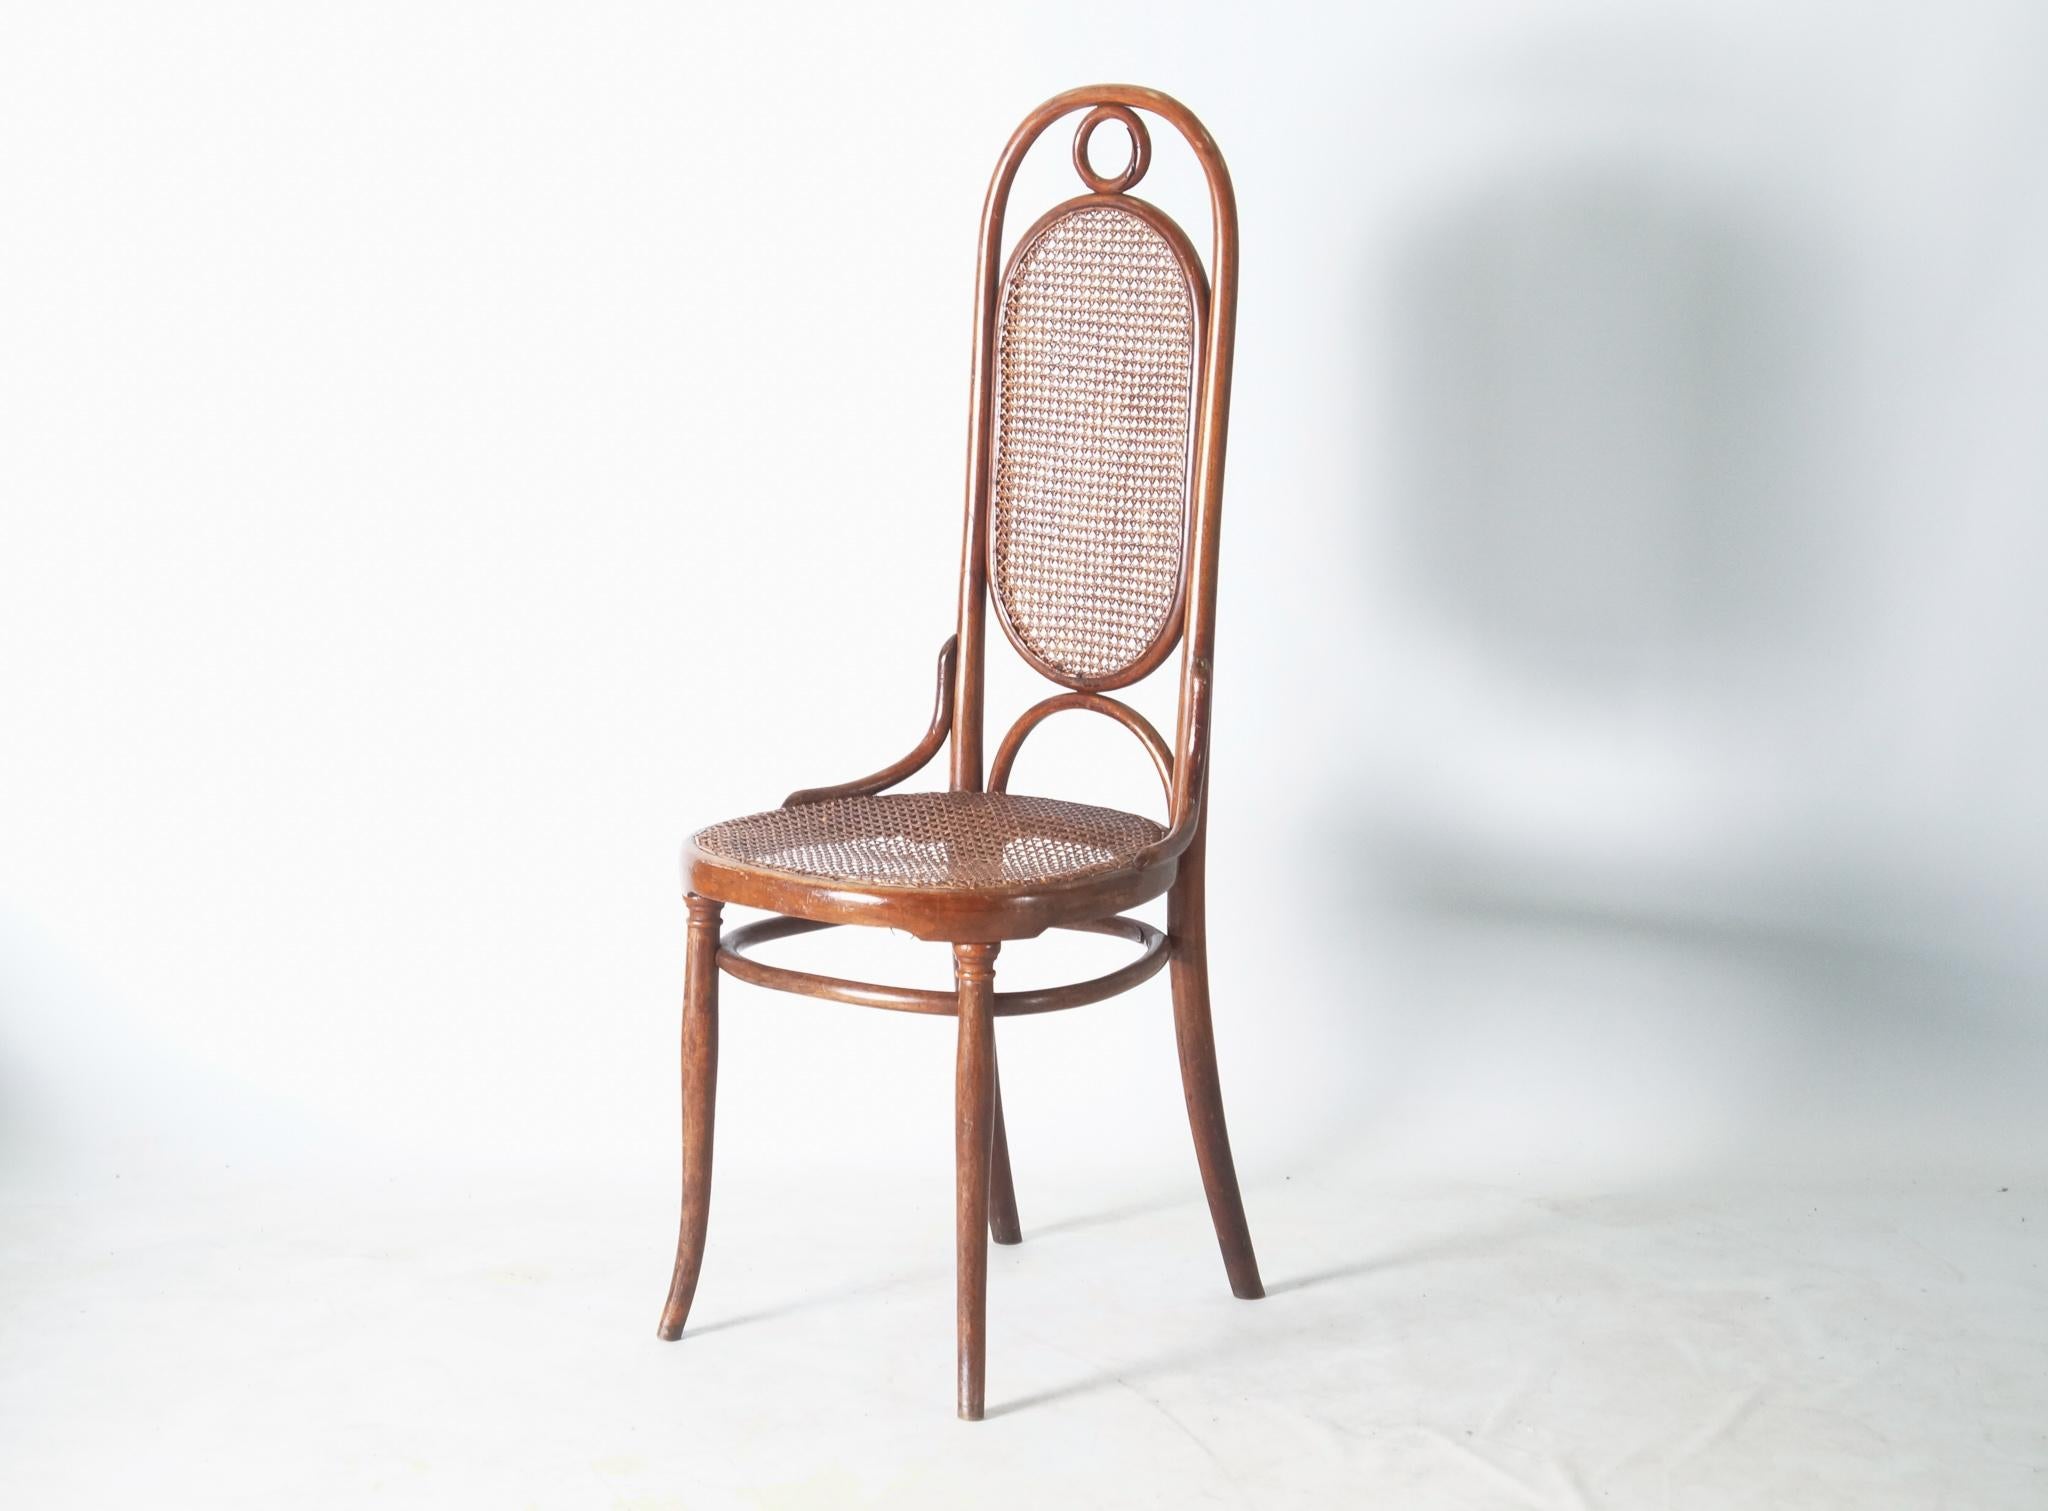 Ca 1860 - Thonet early original no.17 'Long John'
 
Thonet no.17
- Very early example of classic chairs No. 17 produced at the Korytschany factory.
- Hand woven.
- With the original orange stamp early edition.

Dimensions:
W 46 x D 50 x H